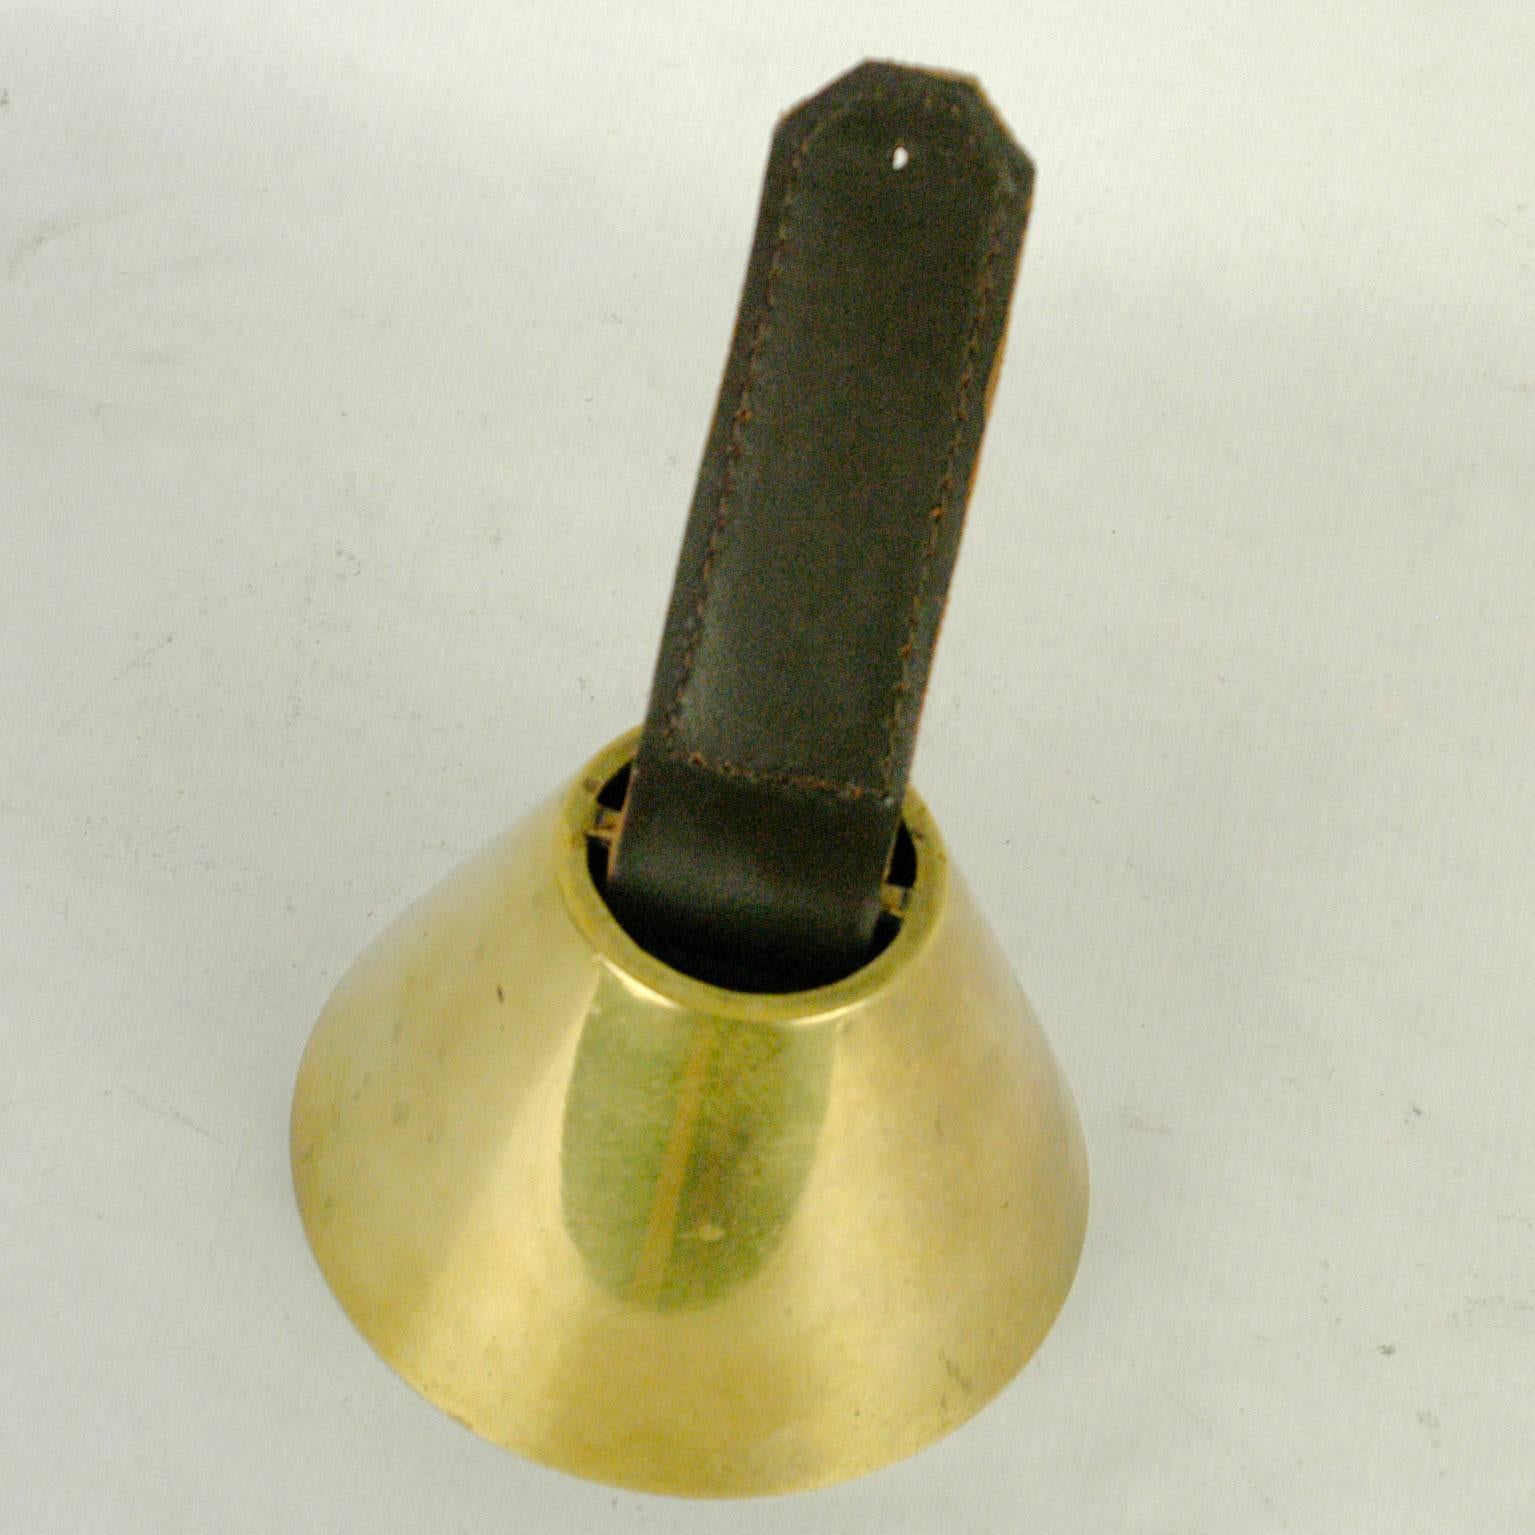 Austrian midcentury brass and leather bell by Designer and Architect Carl Auböck.
The leather has been renewed.